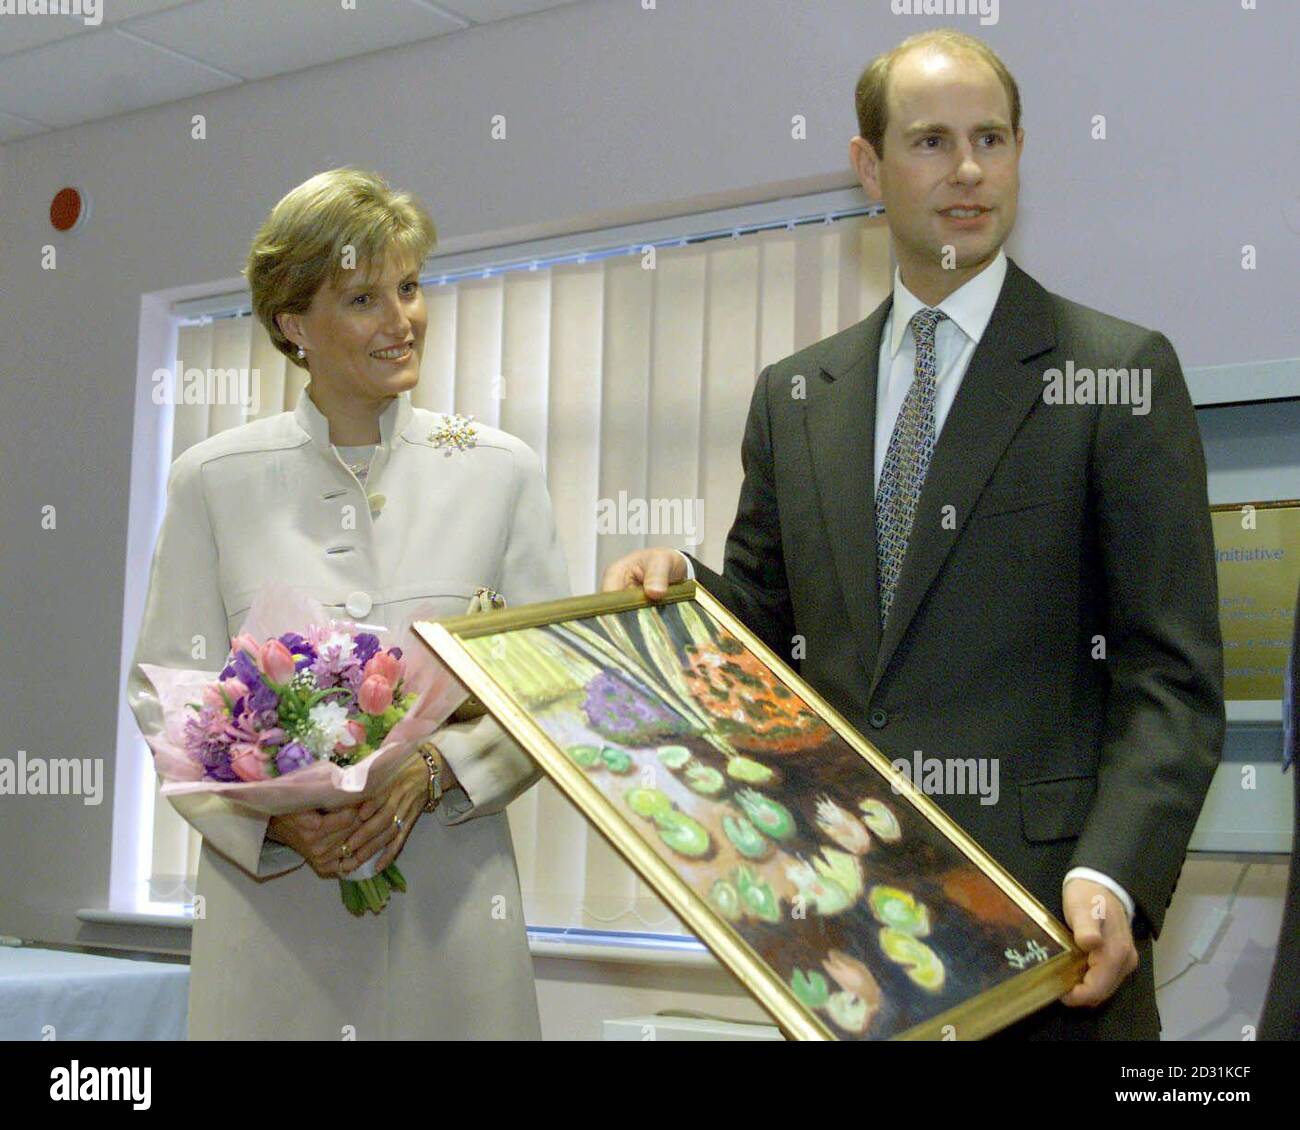 The Count And Countess of Wessex with gifts presented to them during their visit toThe Disability Initiative Resource Centre in Camberley, Surrey. * The Countess was presented with flowers by 21-year-old Terry Parish, who has lost both of her legs below her knee and all her fingertips due to illness, and the still life painting came from a patient called David Shevloff, who had spent three months working on the gift. Stock Photo